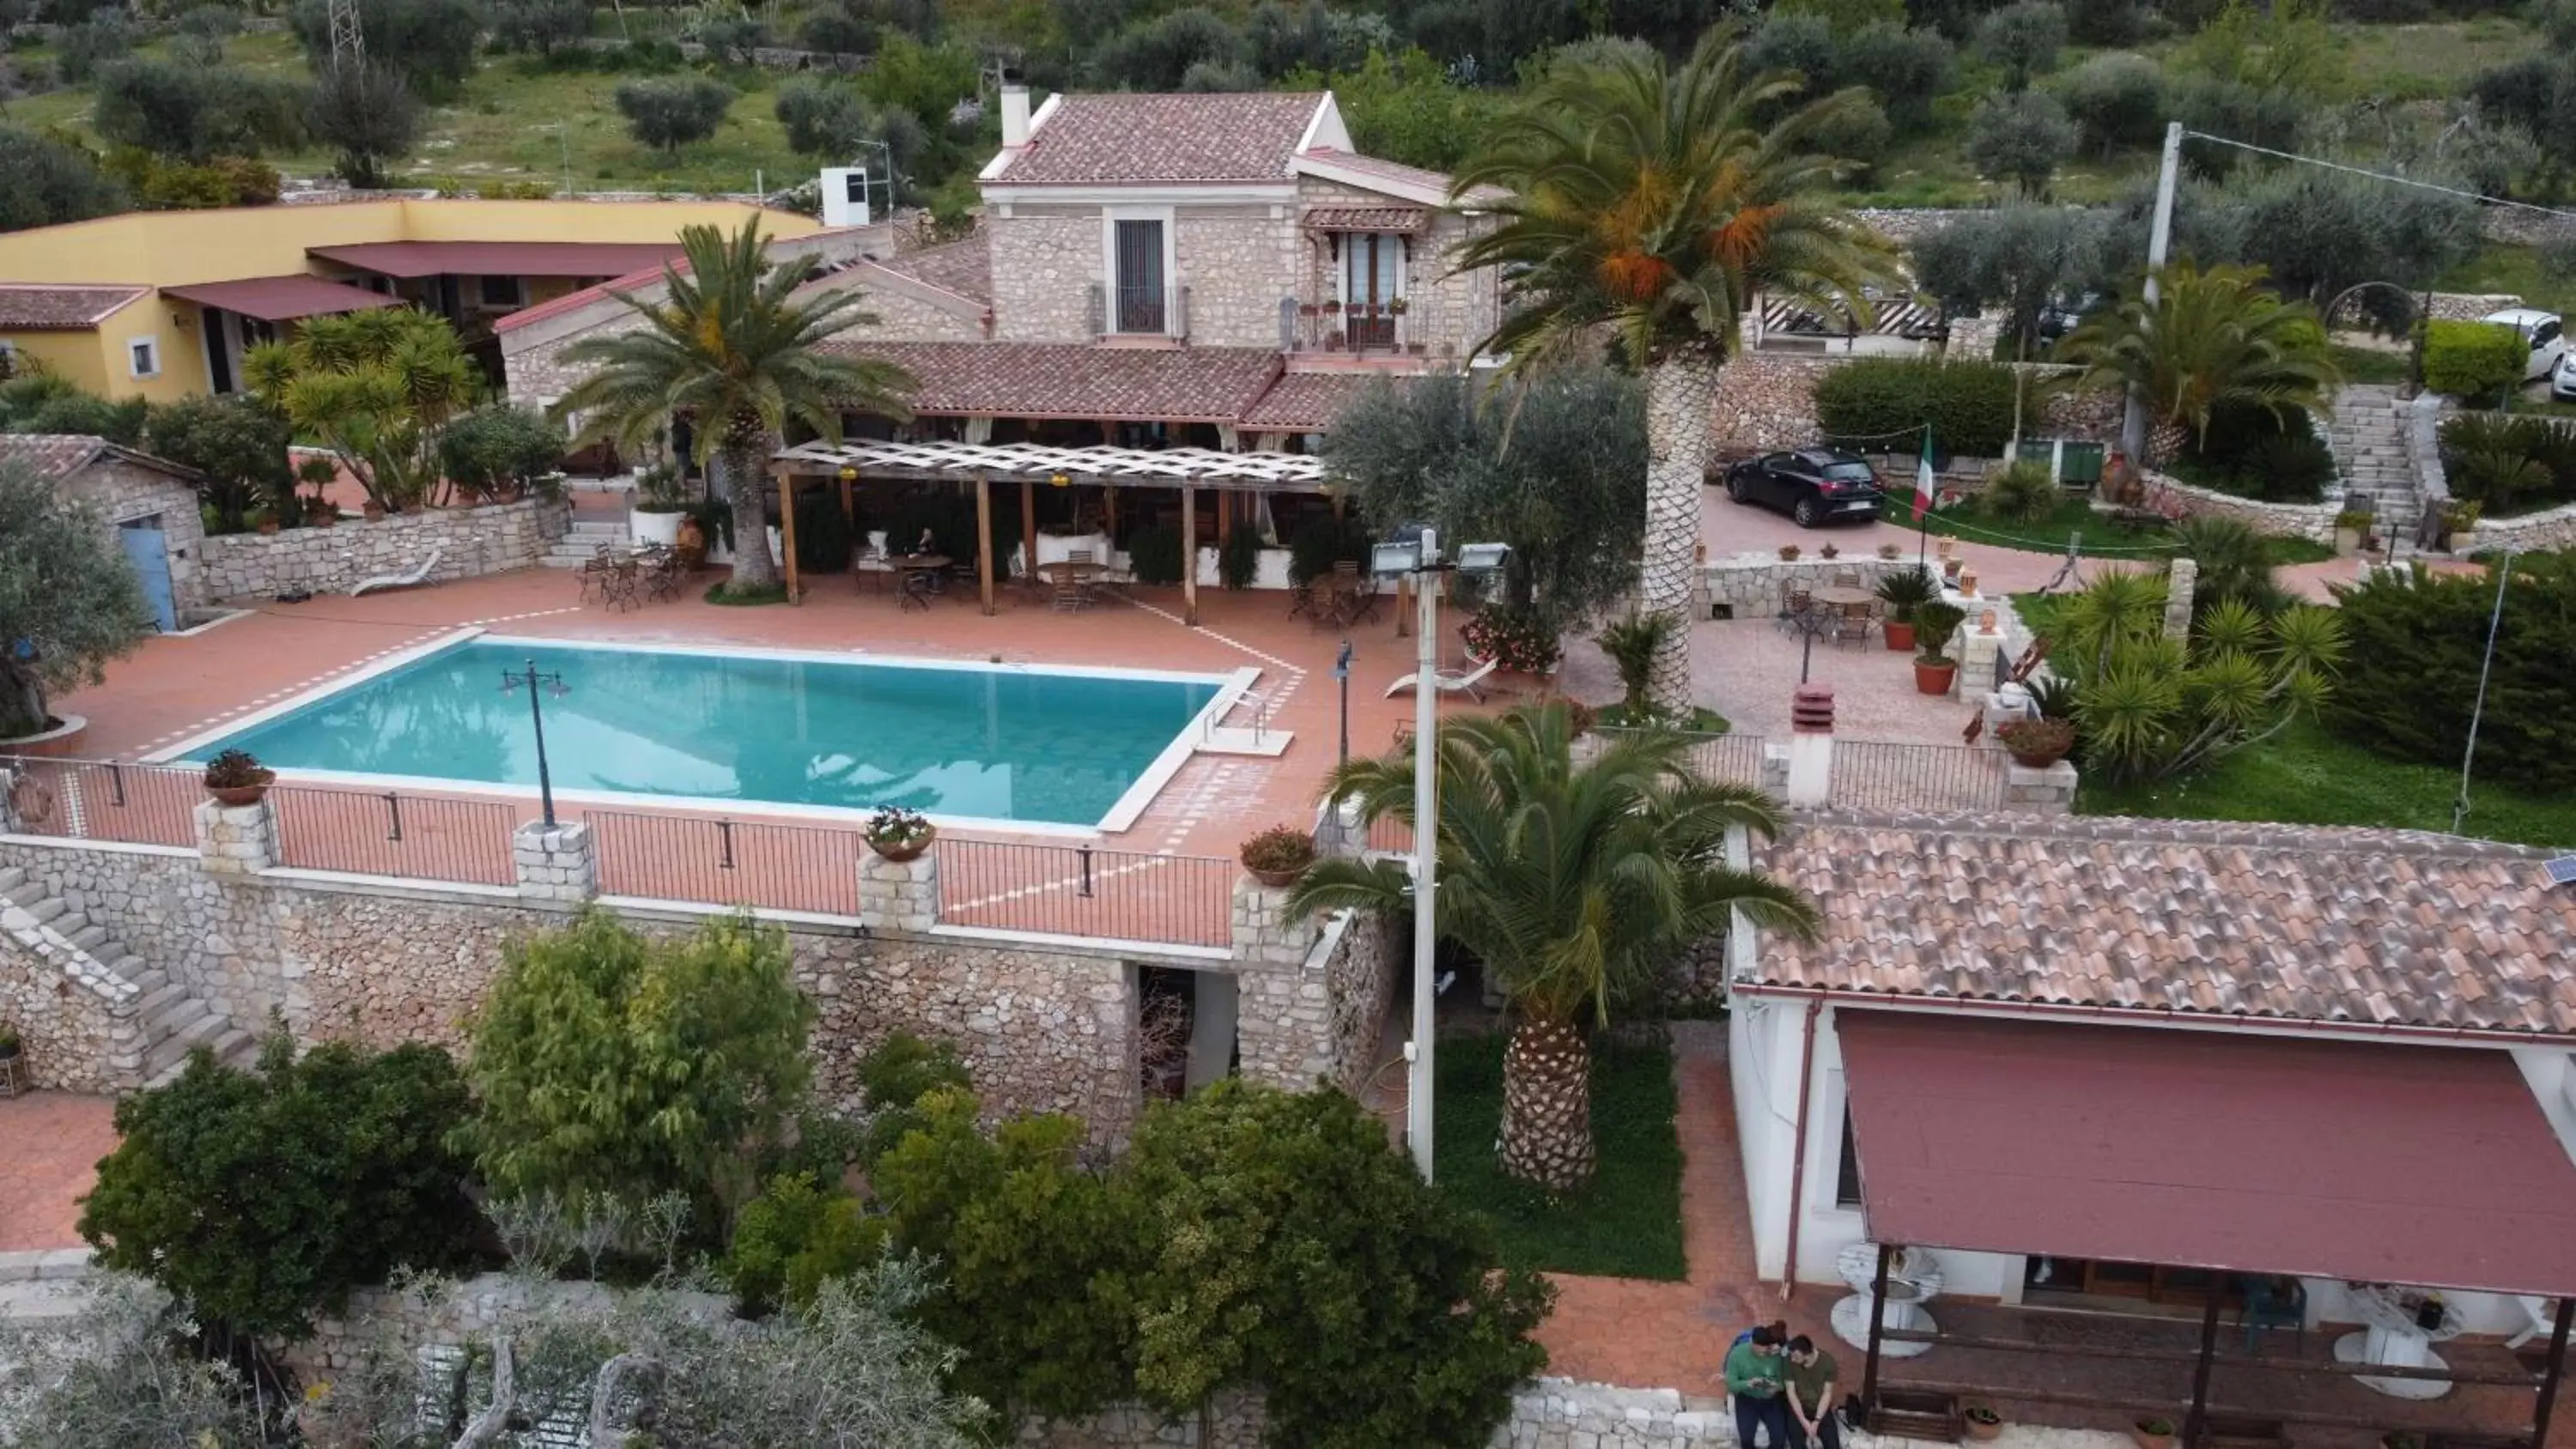 Property building, Pool View in Le Cese